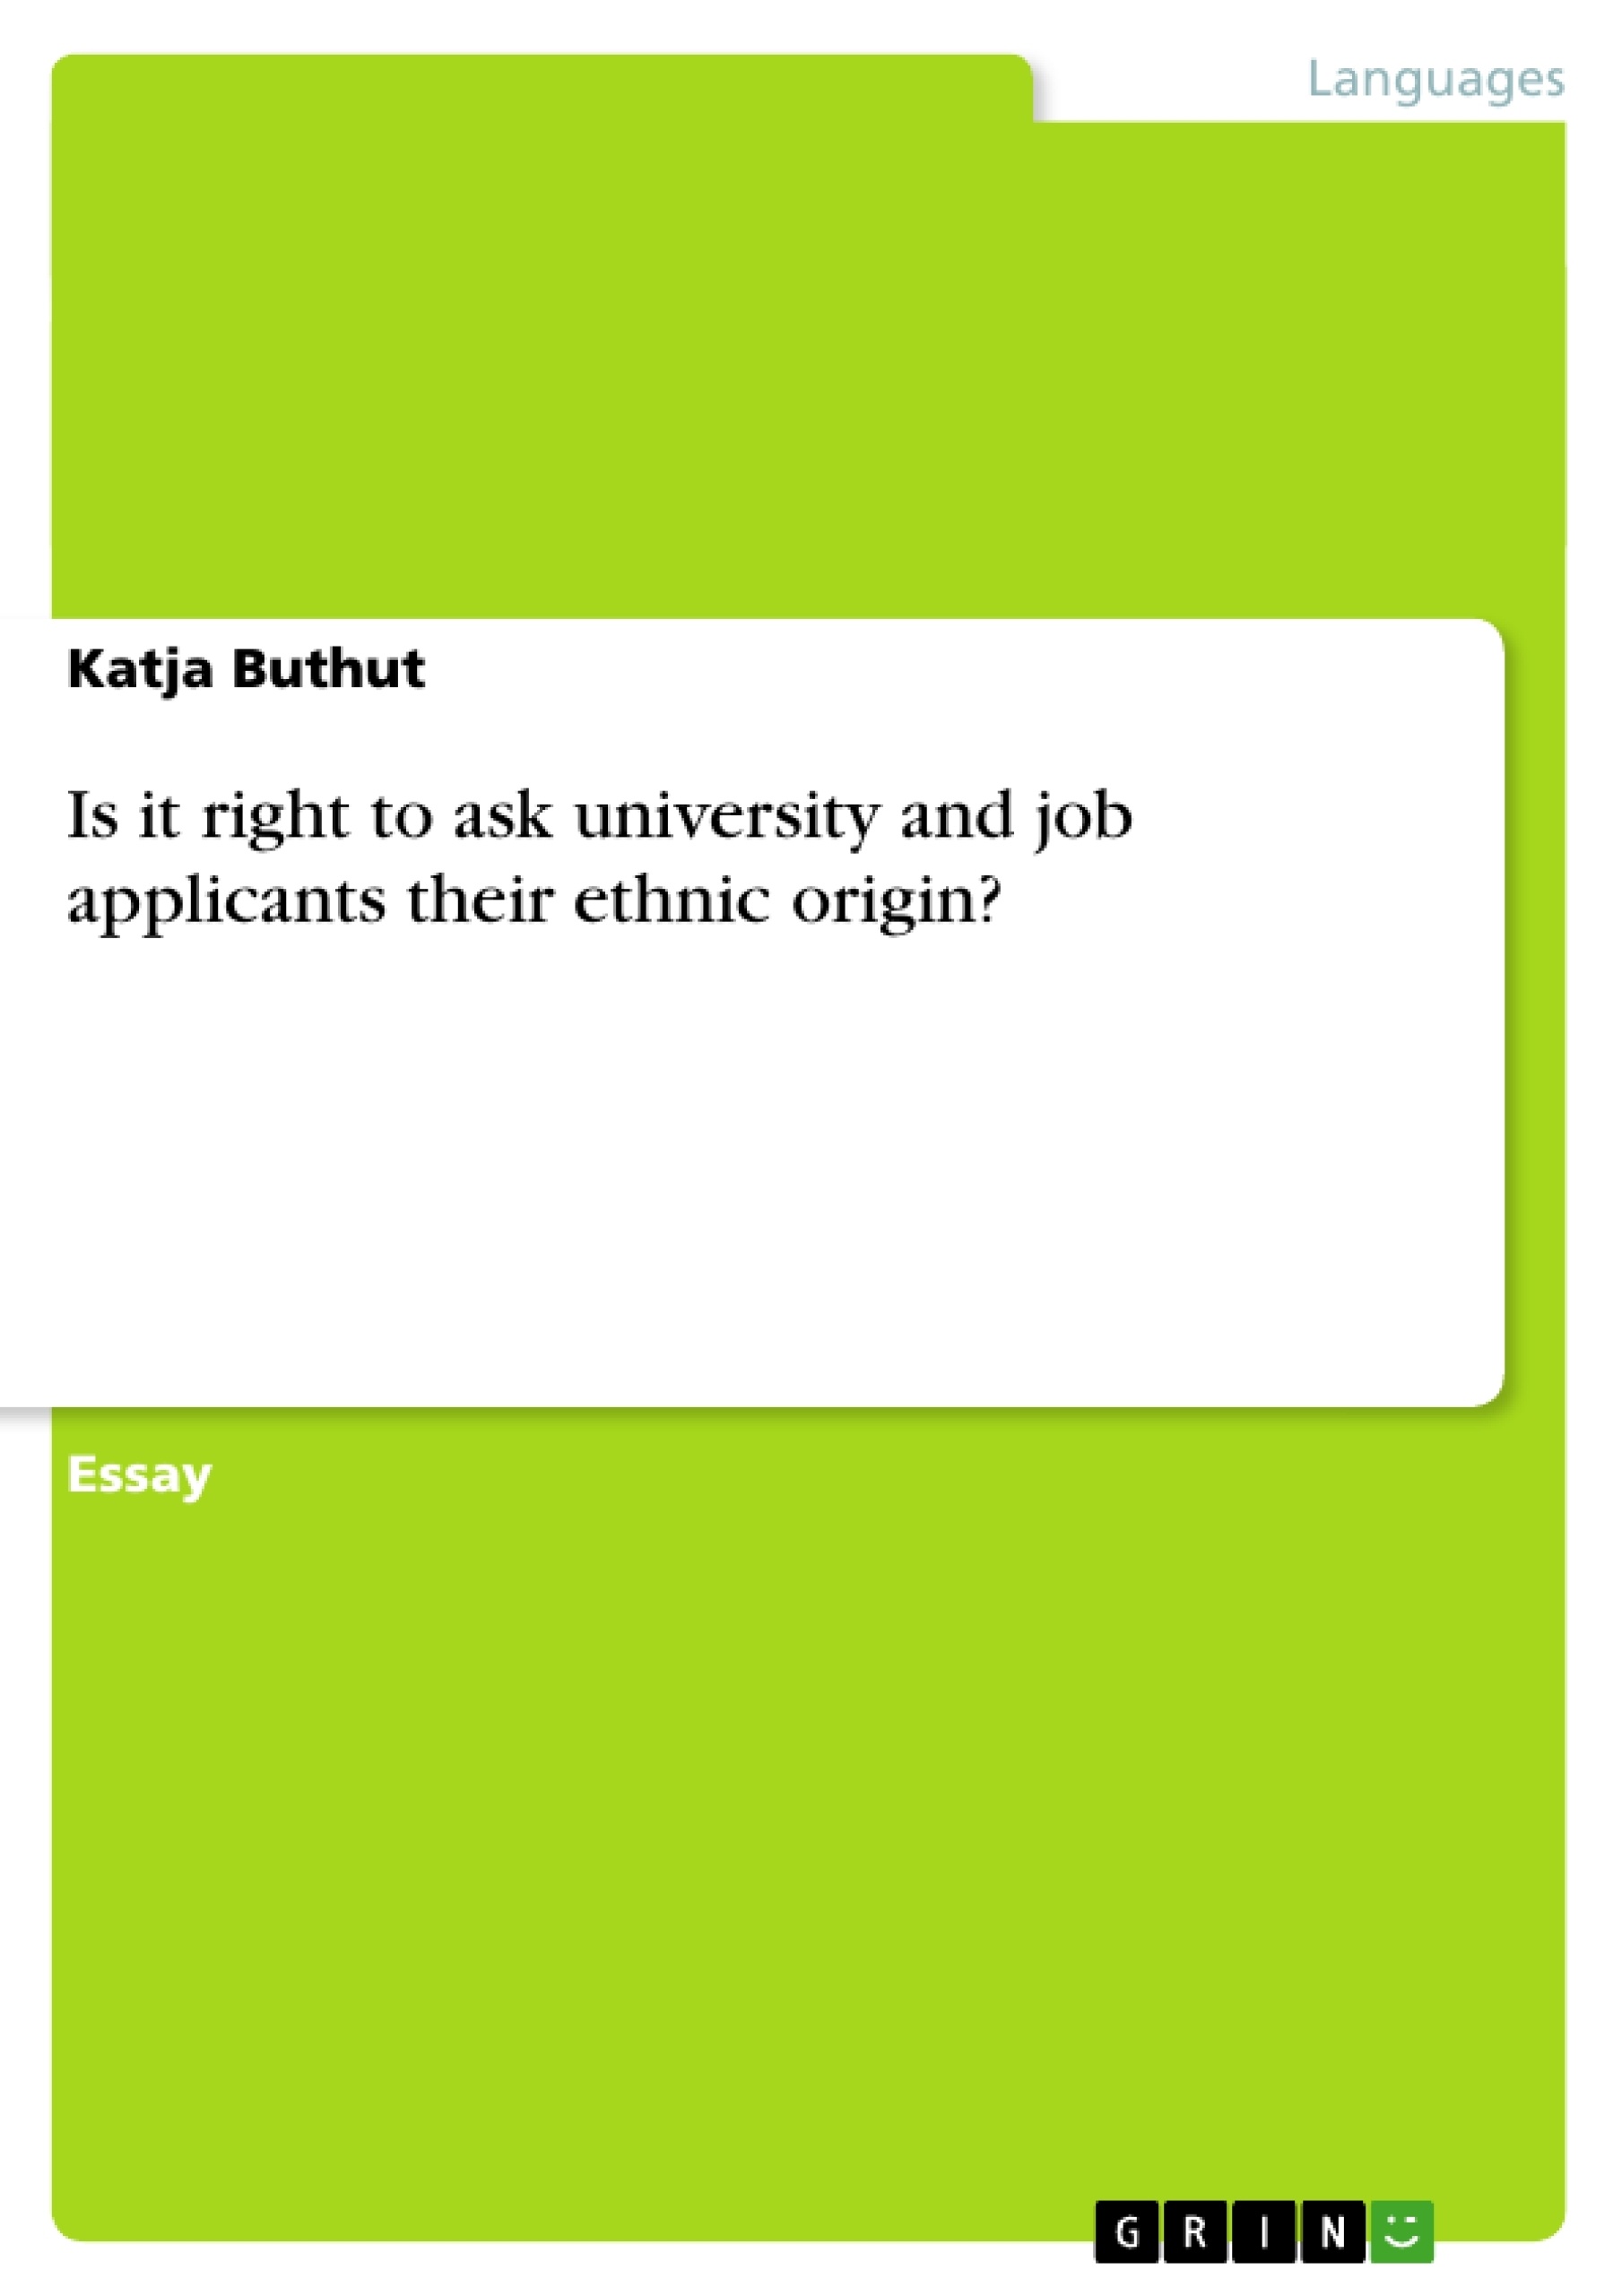 Título: Is it right to ask university and job applicants their ethnic origin?